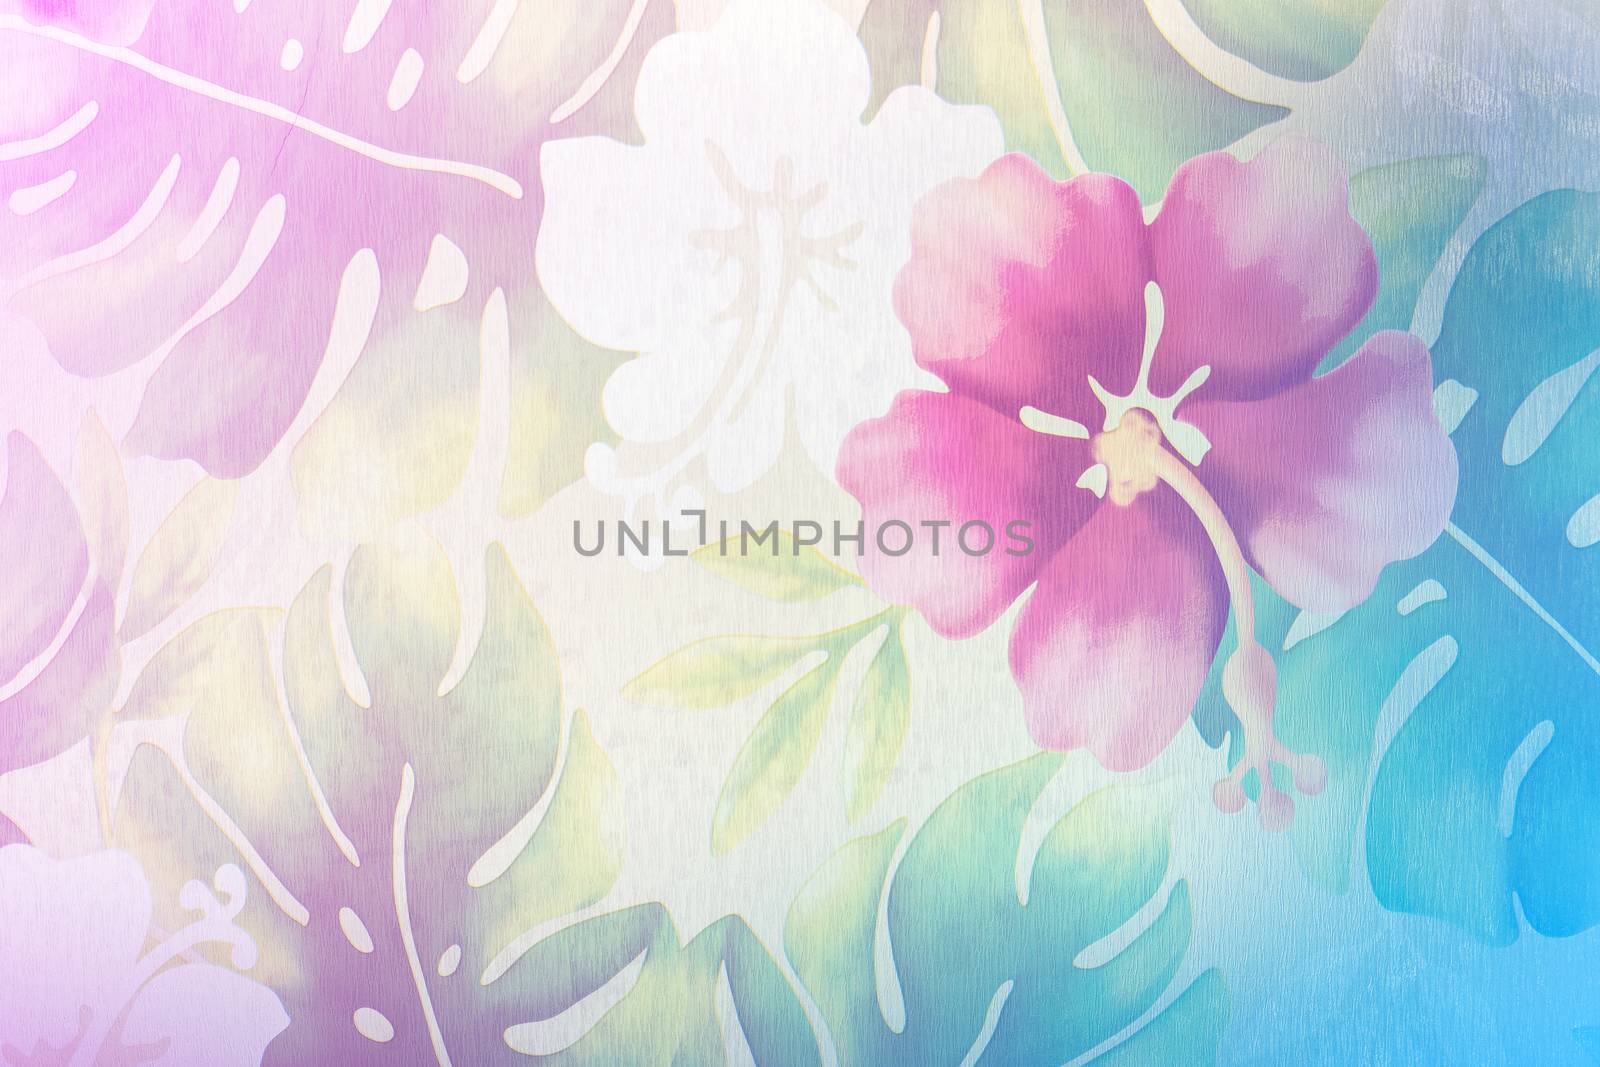 Soft color of the plastic flower paintings for window blinds and wallpaper.